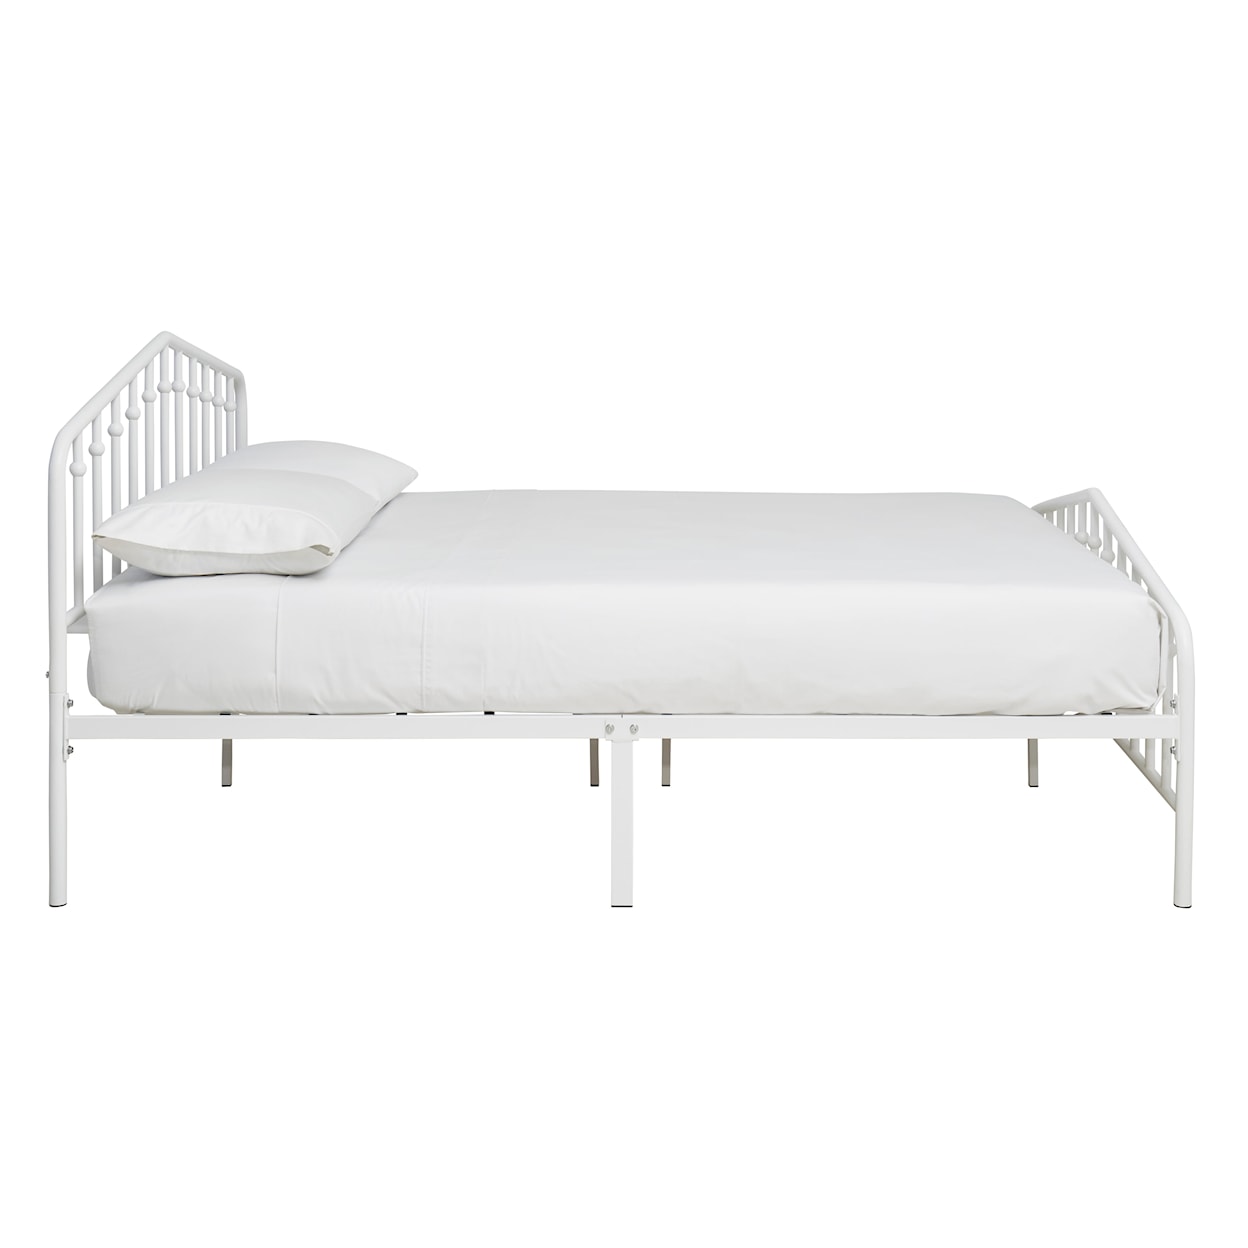 Signature Design by Ashley Trentlore Queen Metal Bed